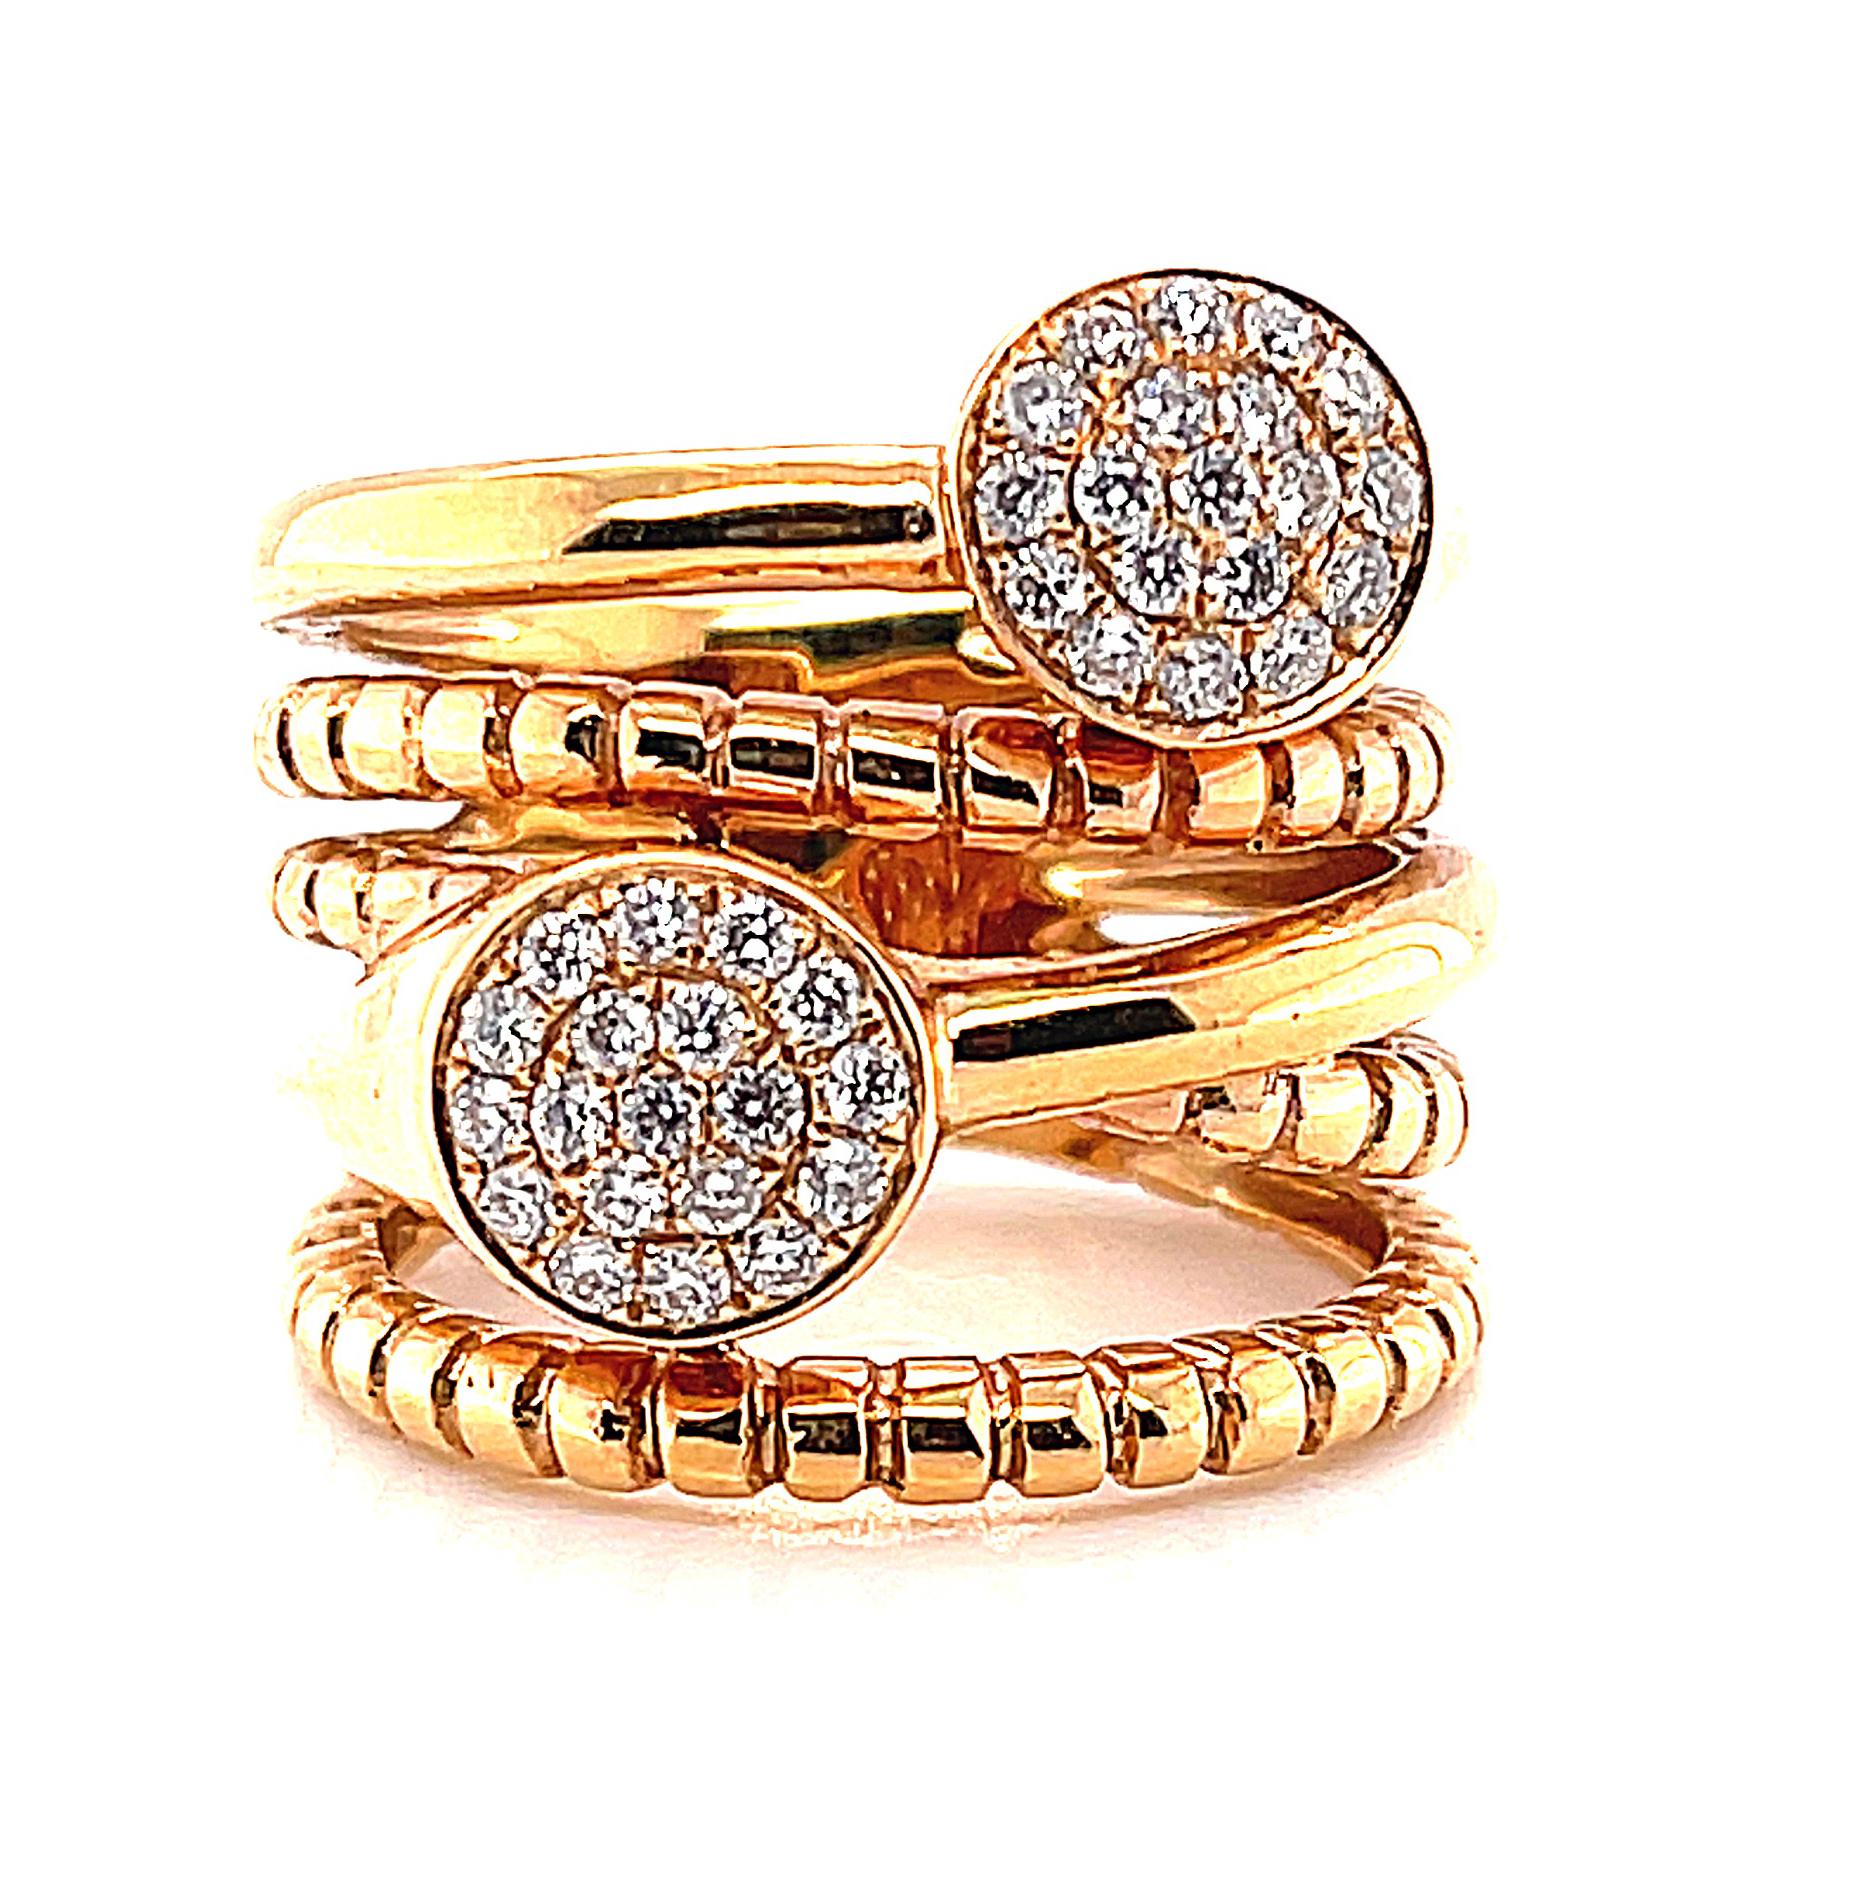 This stylish criss-cross ring is a lovely statement of never-ending devotion! Diamond studded rose gold discs sparkle in a unique combination of textured and highly polished rose gold bands. A real signature piece styled for every day wear. This